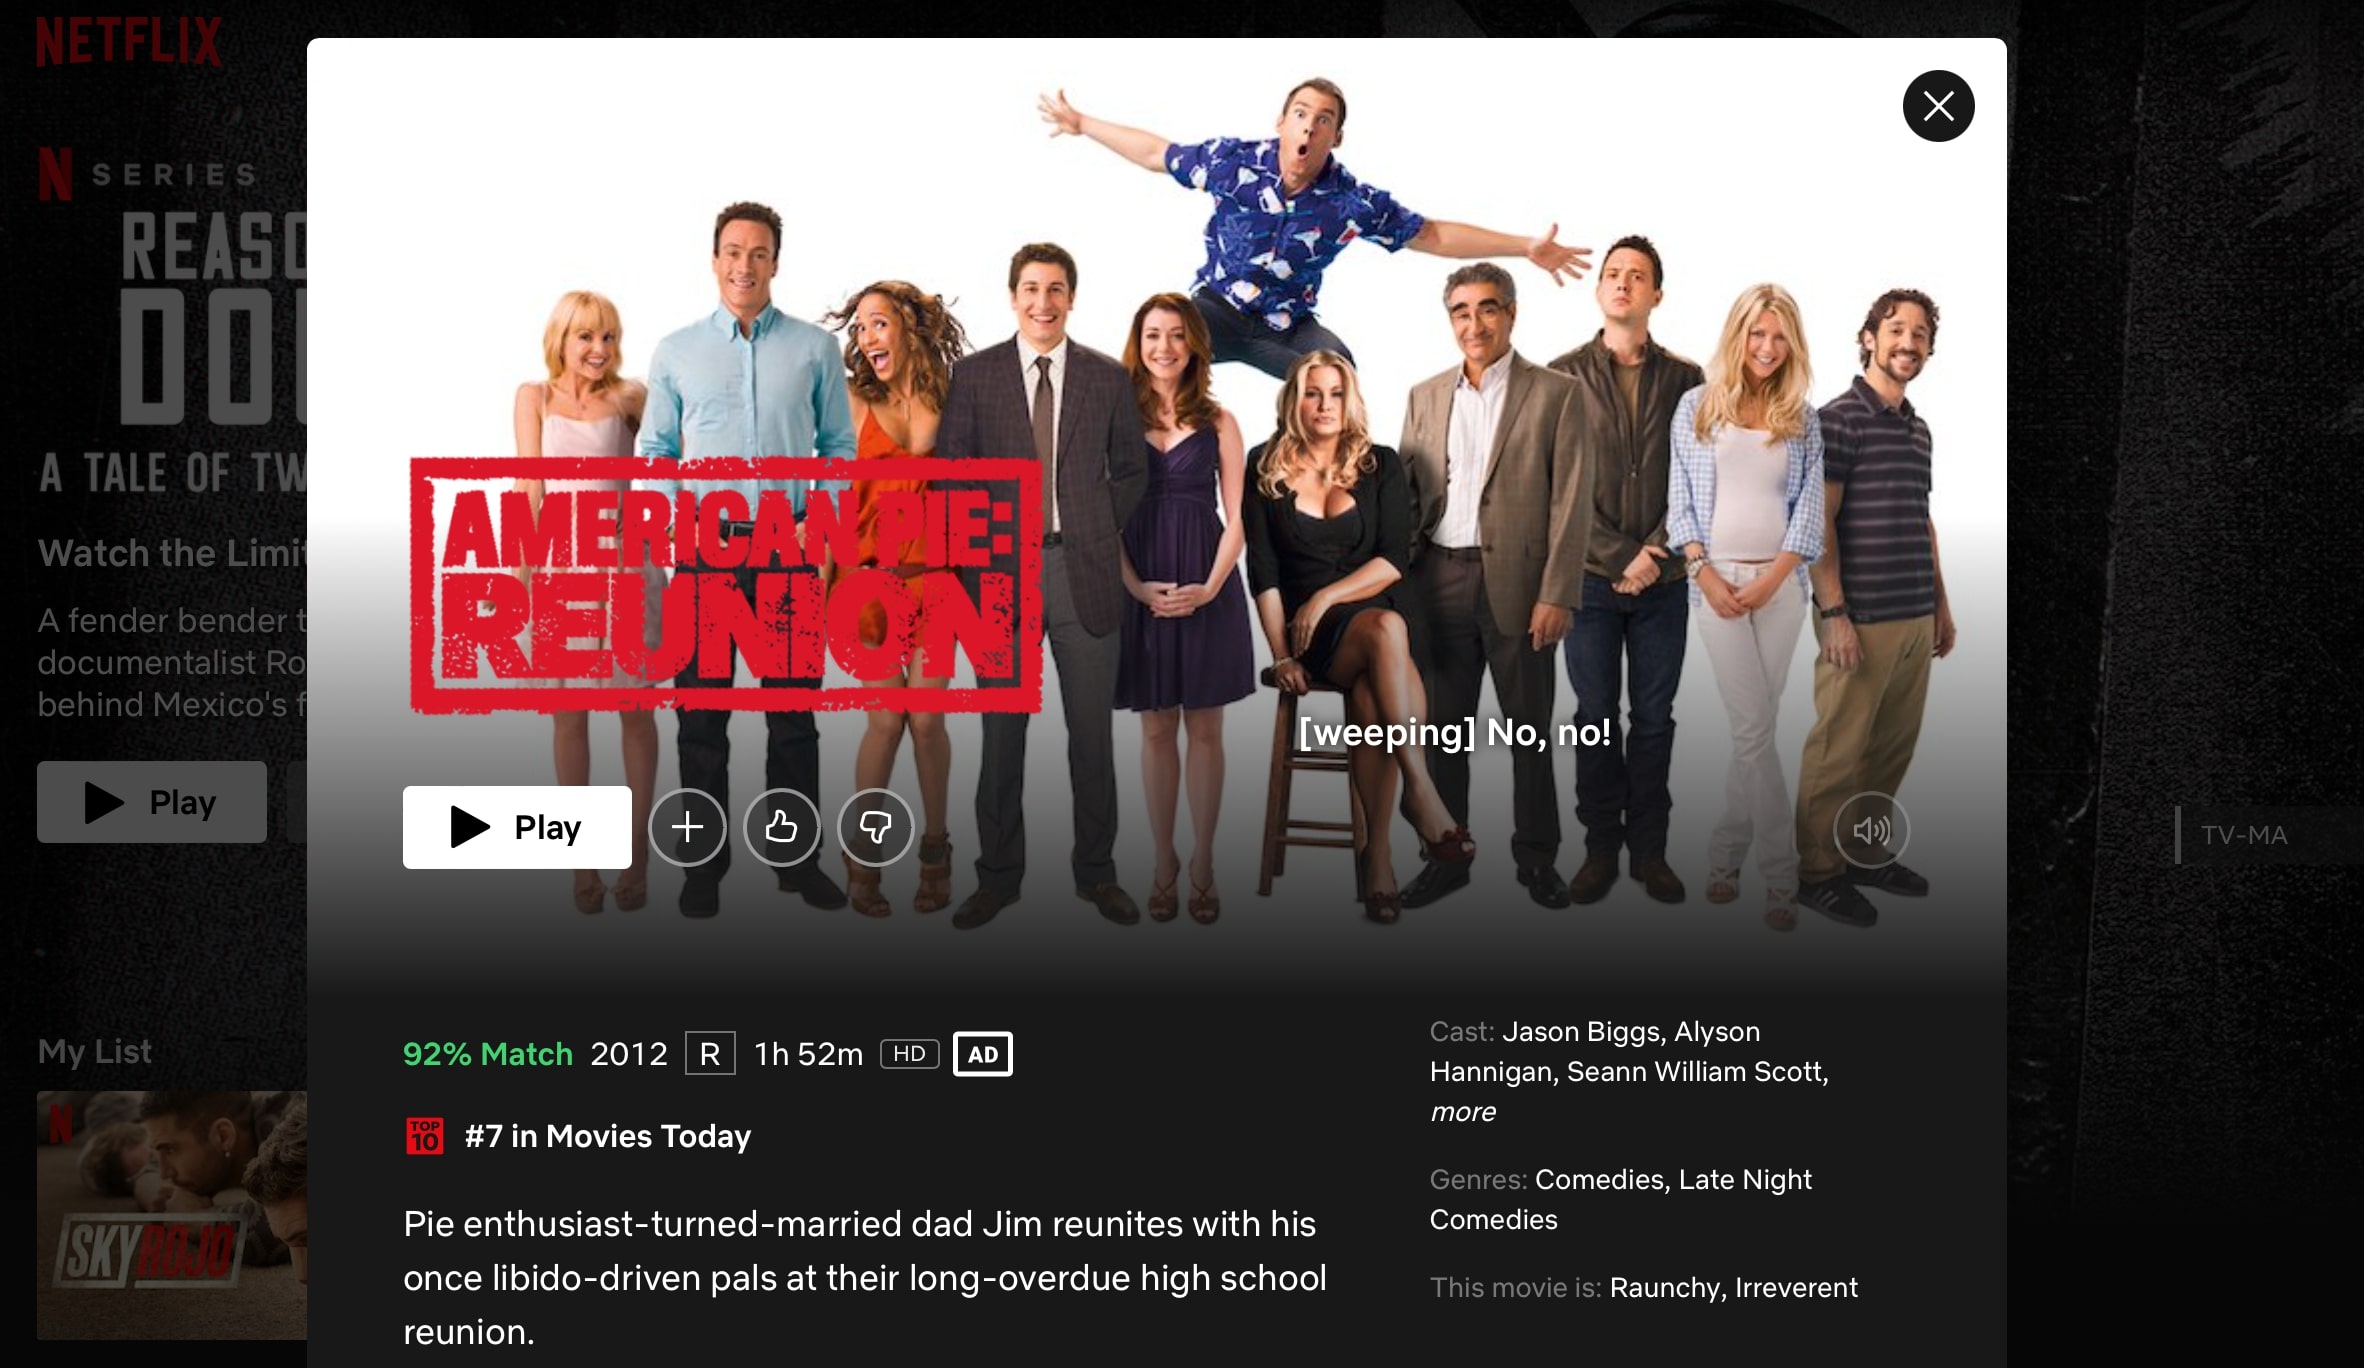 brittany hardwick recommends american pie reunion watch pic